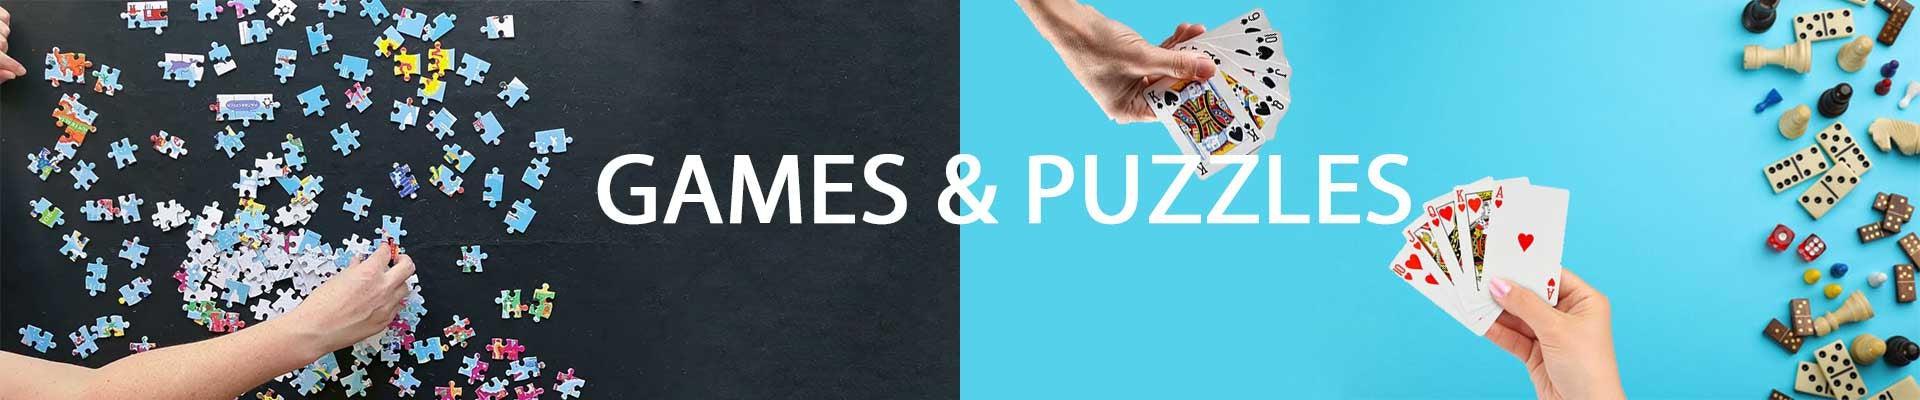 Games & Puzzles Store at Legacy Toys